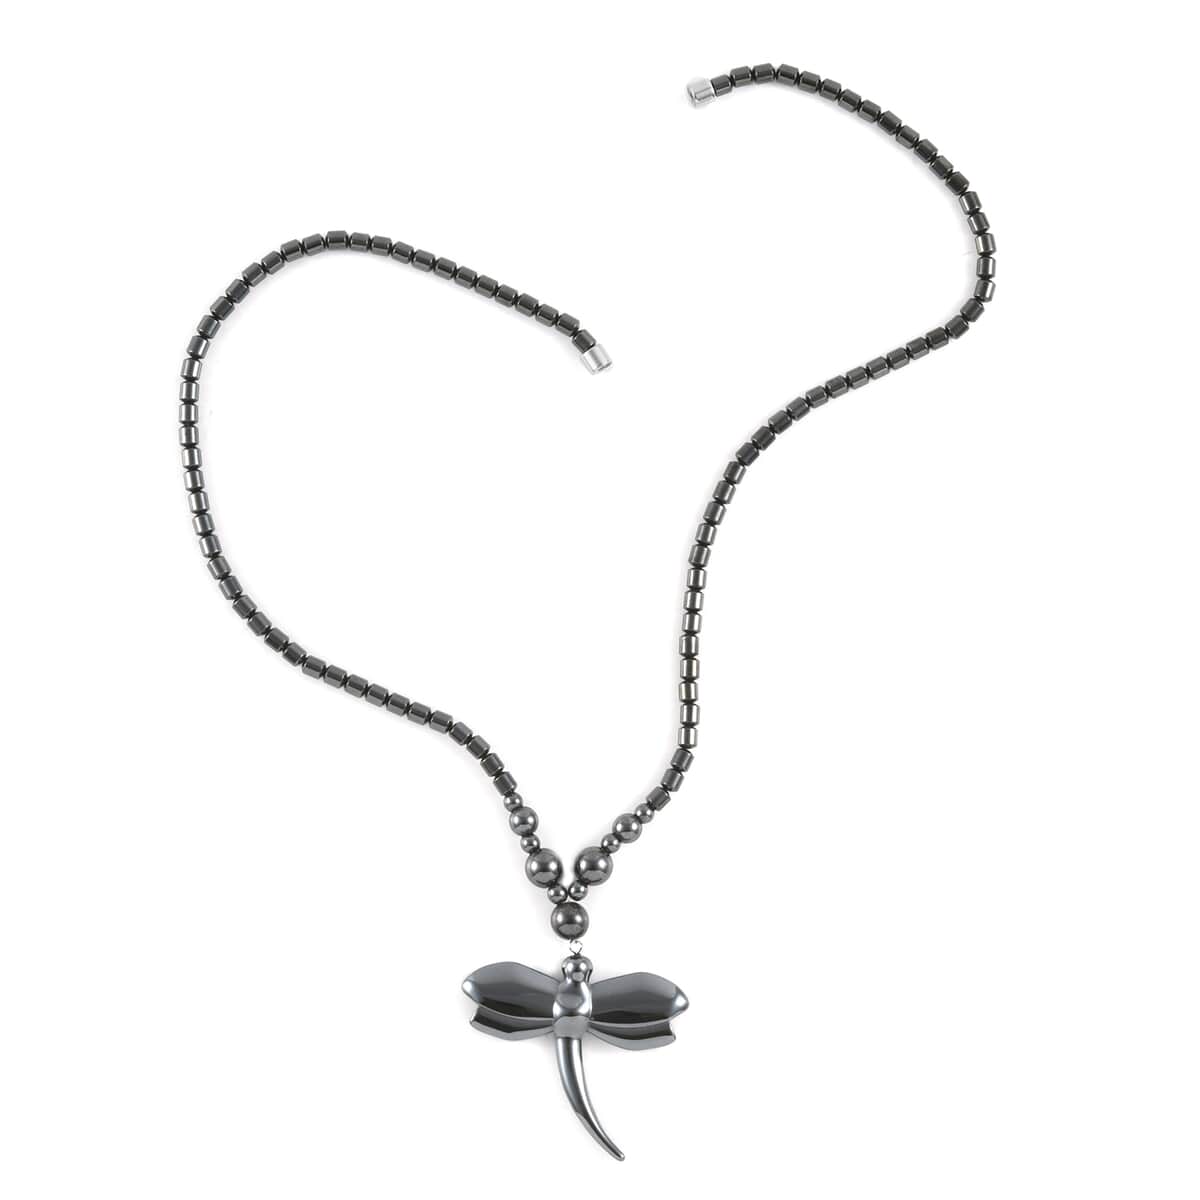 Magnetic by Design Hematite Beaded Necklace 20 Inches with Dragonfly Pendant in Stainless Steel image number 0